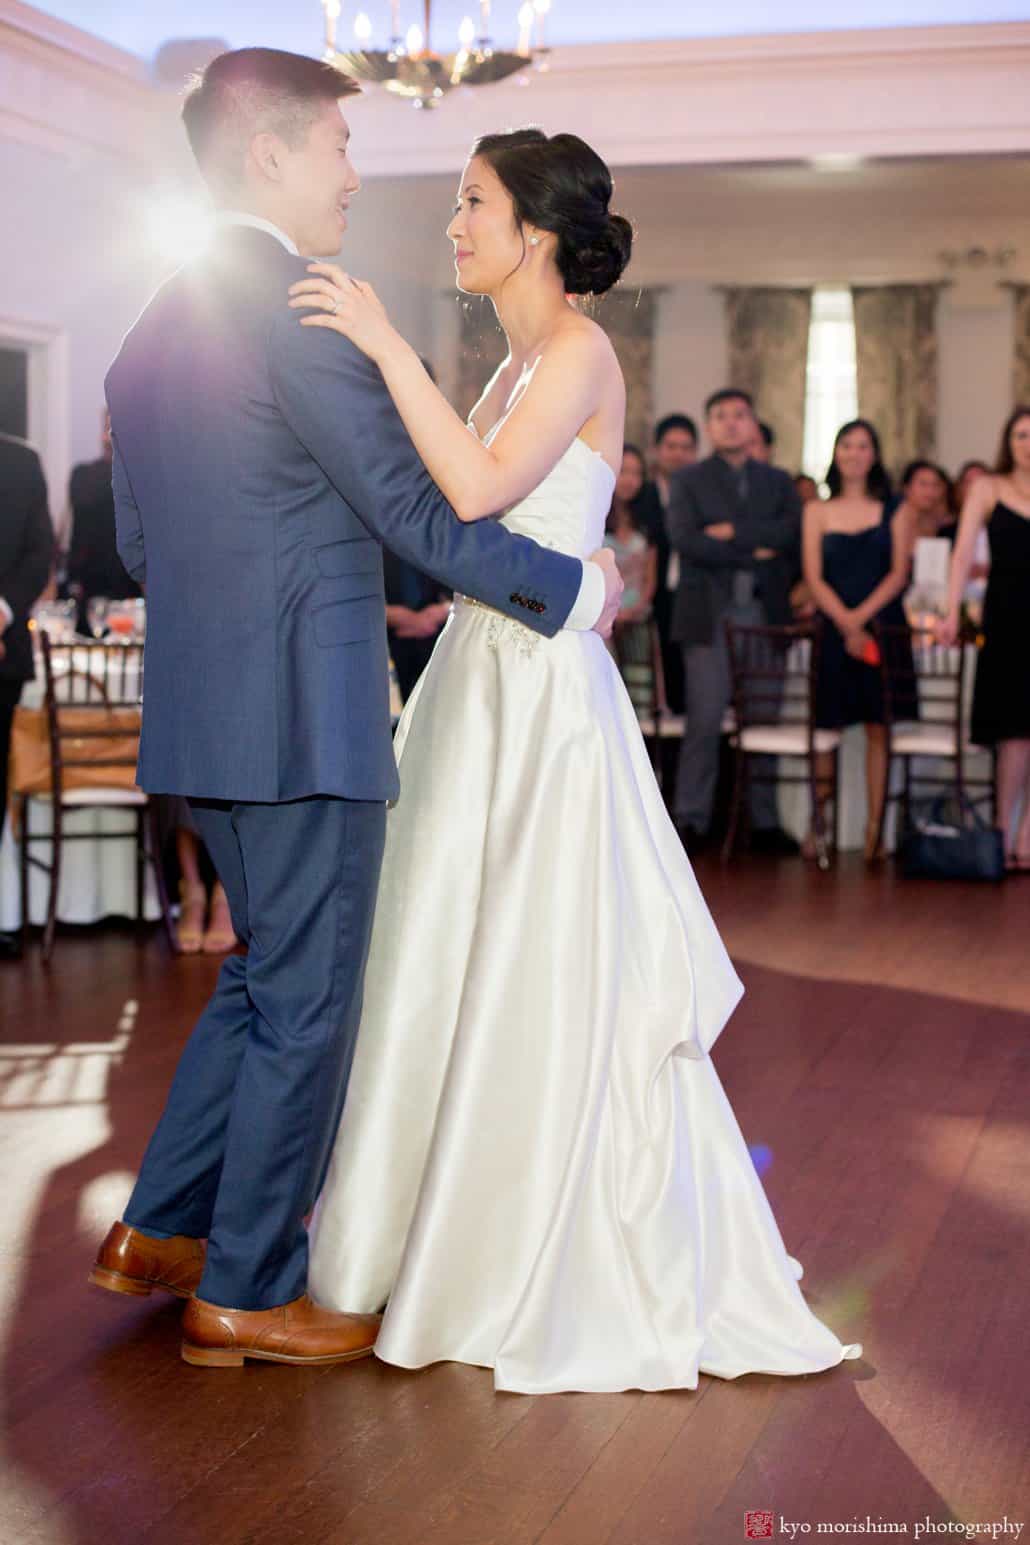 First dance during Korean wedding reception at India House, photographed by Kyo Morishima